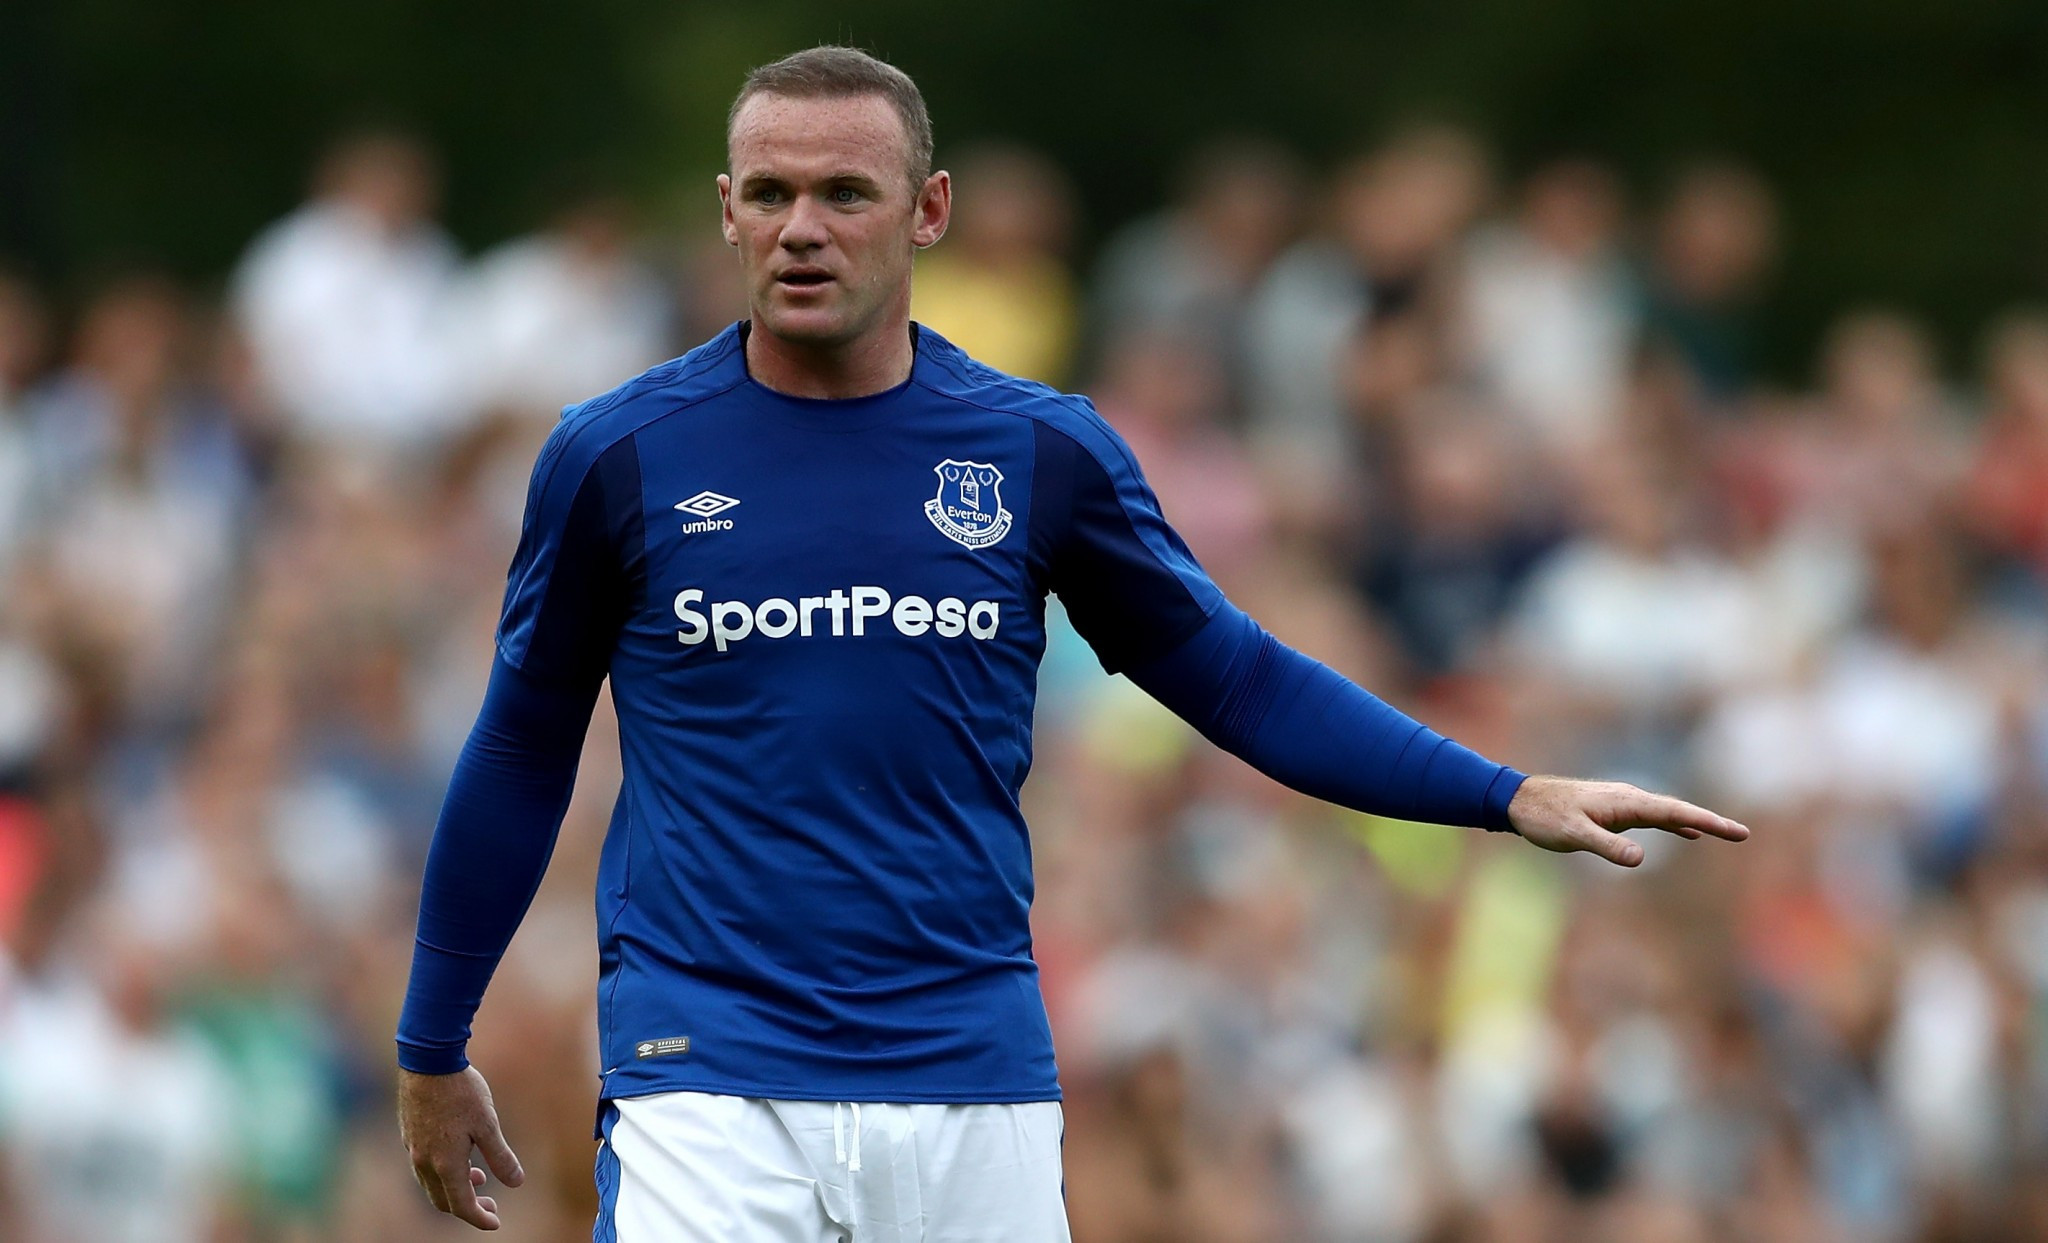 Wayne Rooney returned to Everton from Manchester United this summer ©Getty Images